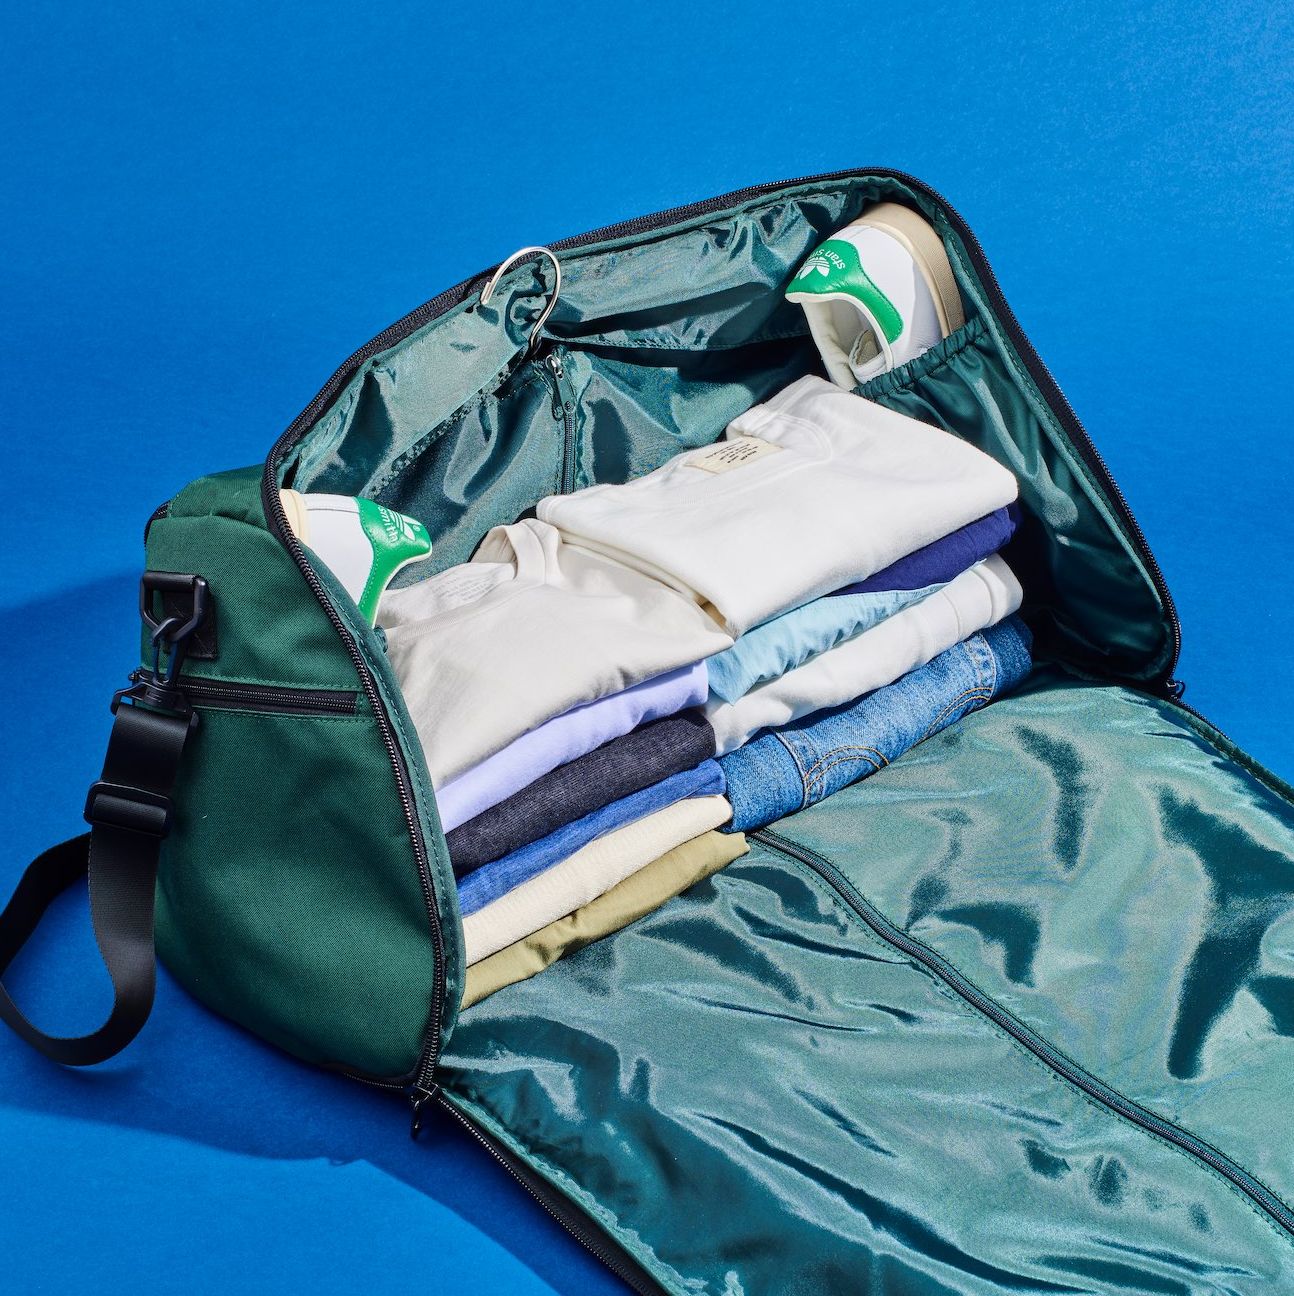 This $98 Duffel Bag Is the Ultimate Travel Hack